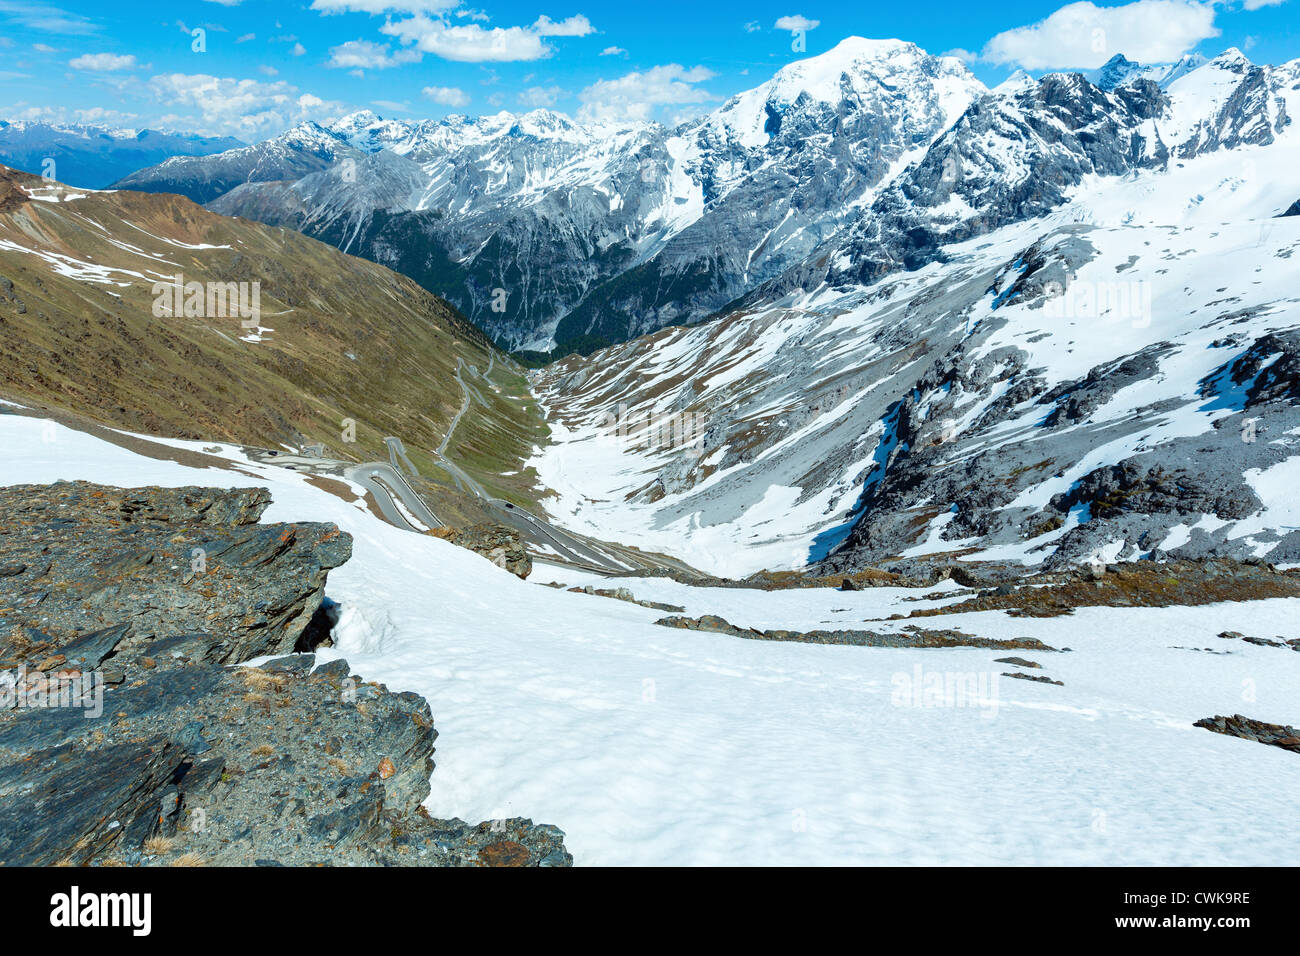 Summer Stelvio pass with alpine road and snow on slope (Italy) Stock Photo